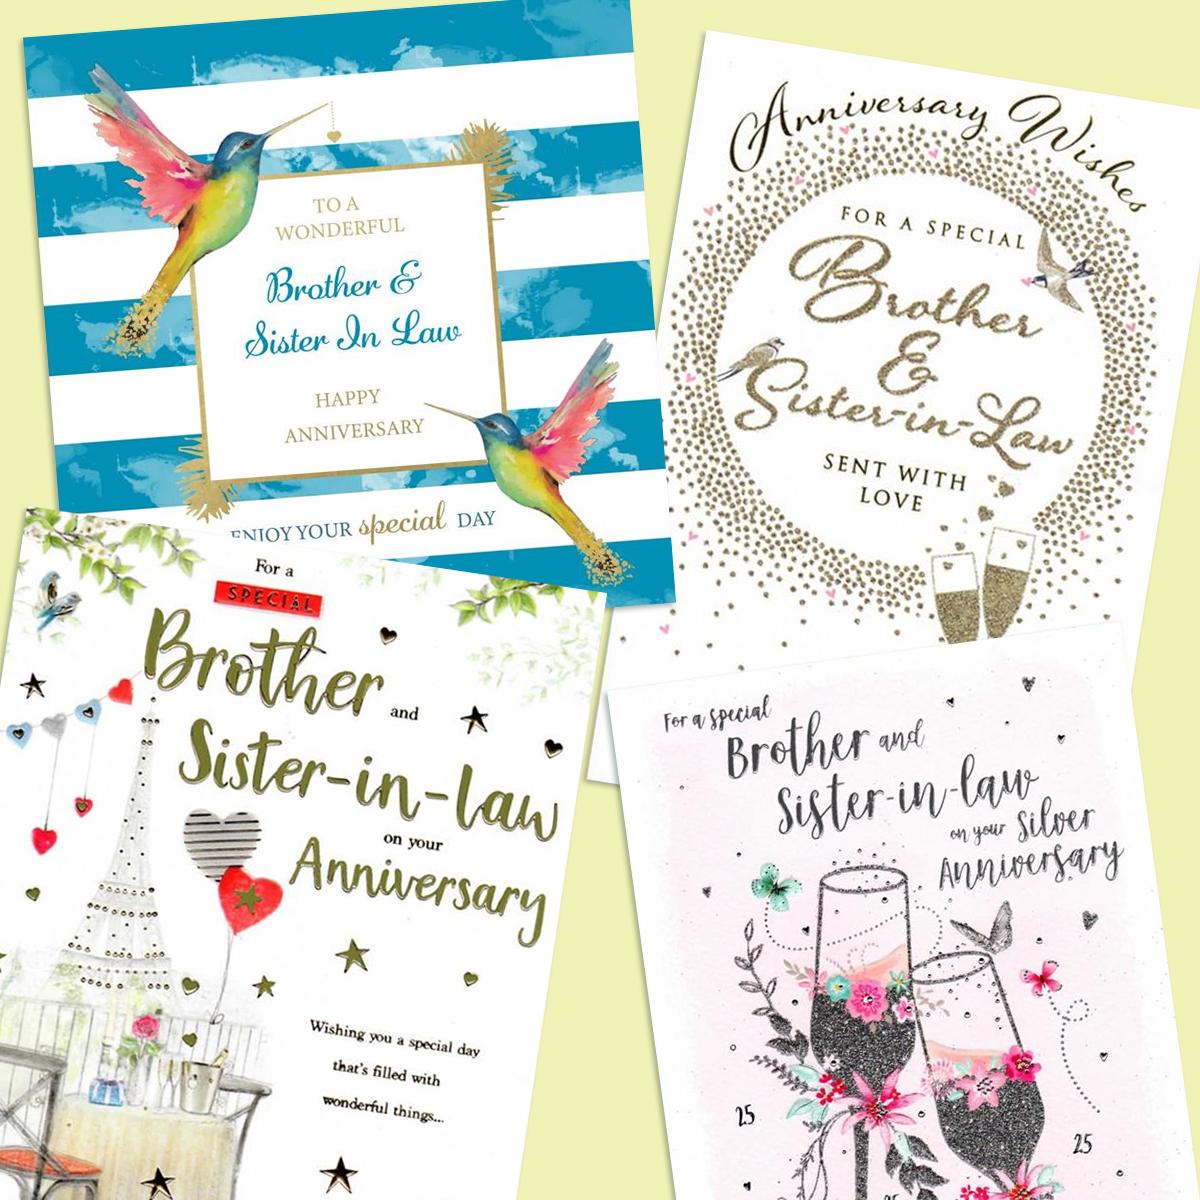 A Selection Of Cards To Show The Depth Of Range In Our Brother And Sister In Law Anniversary Section